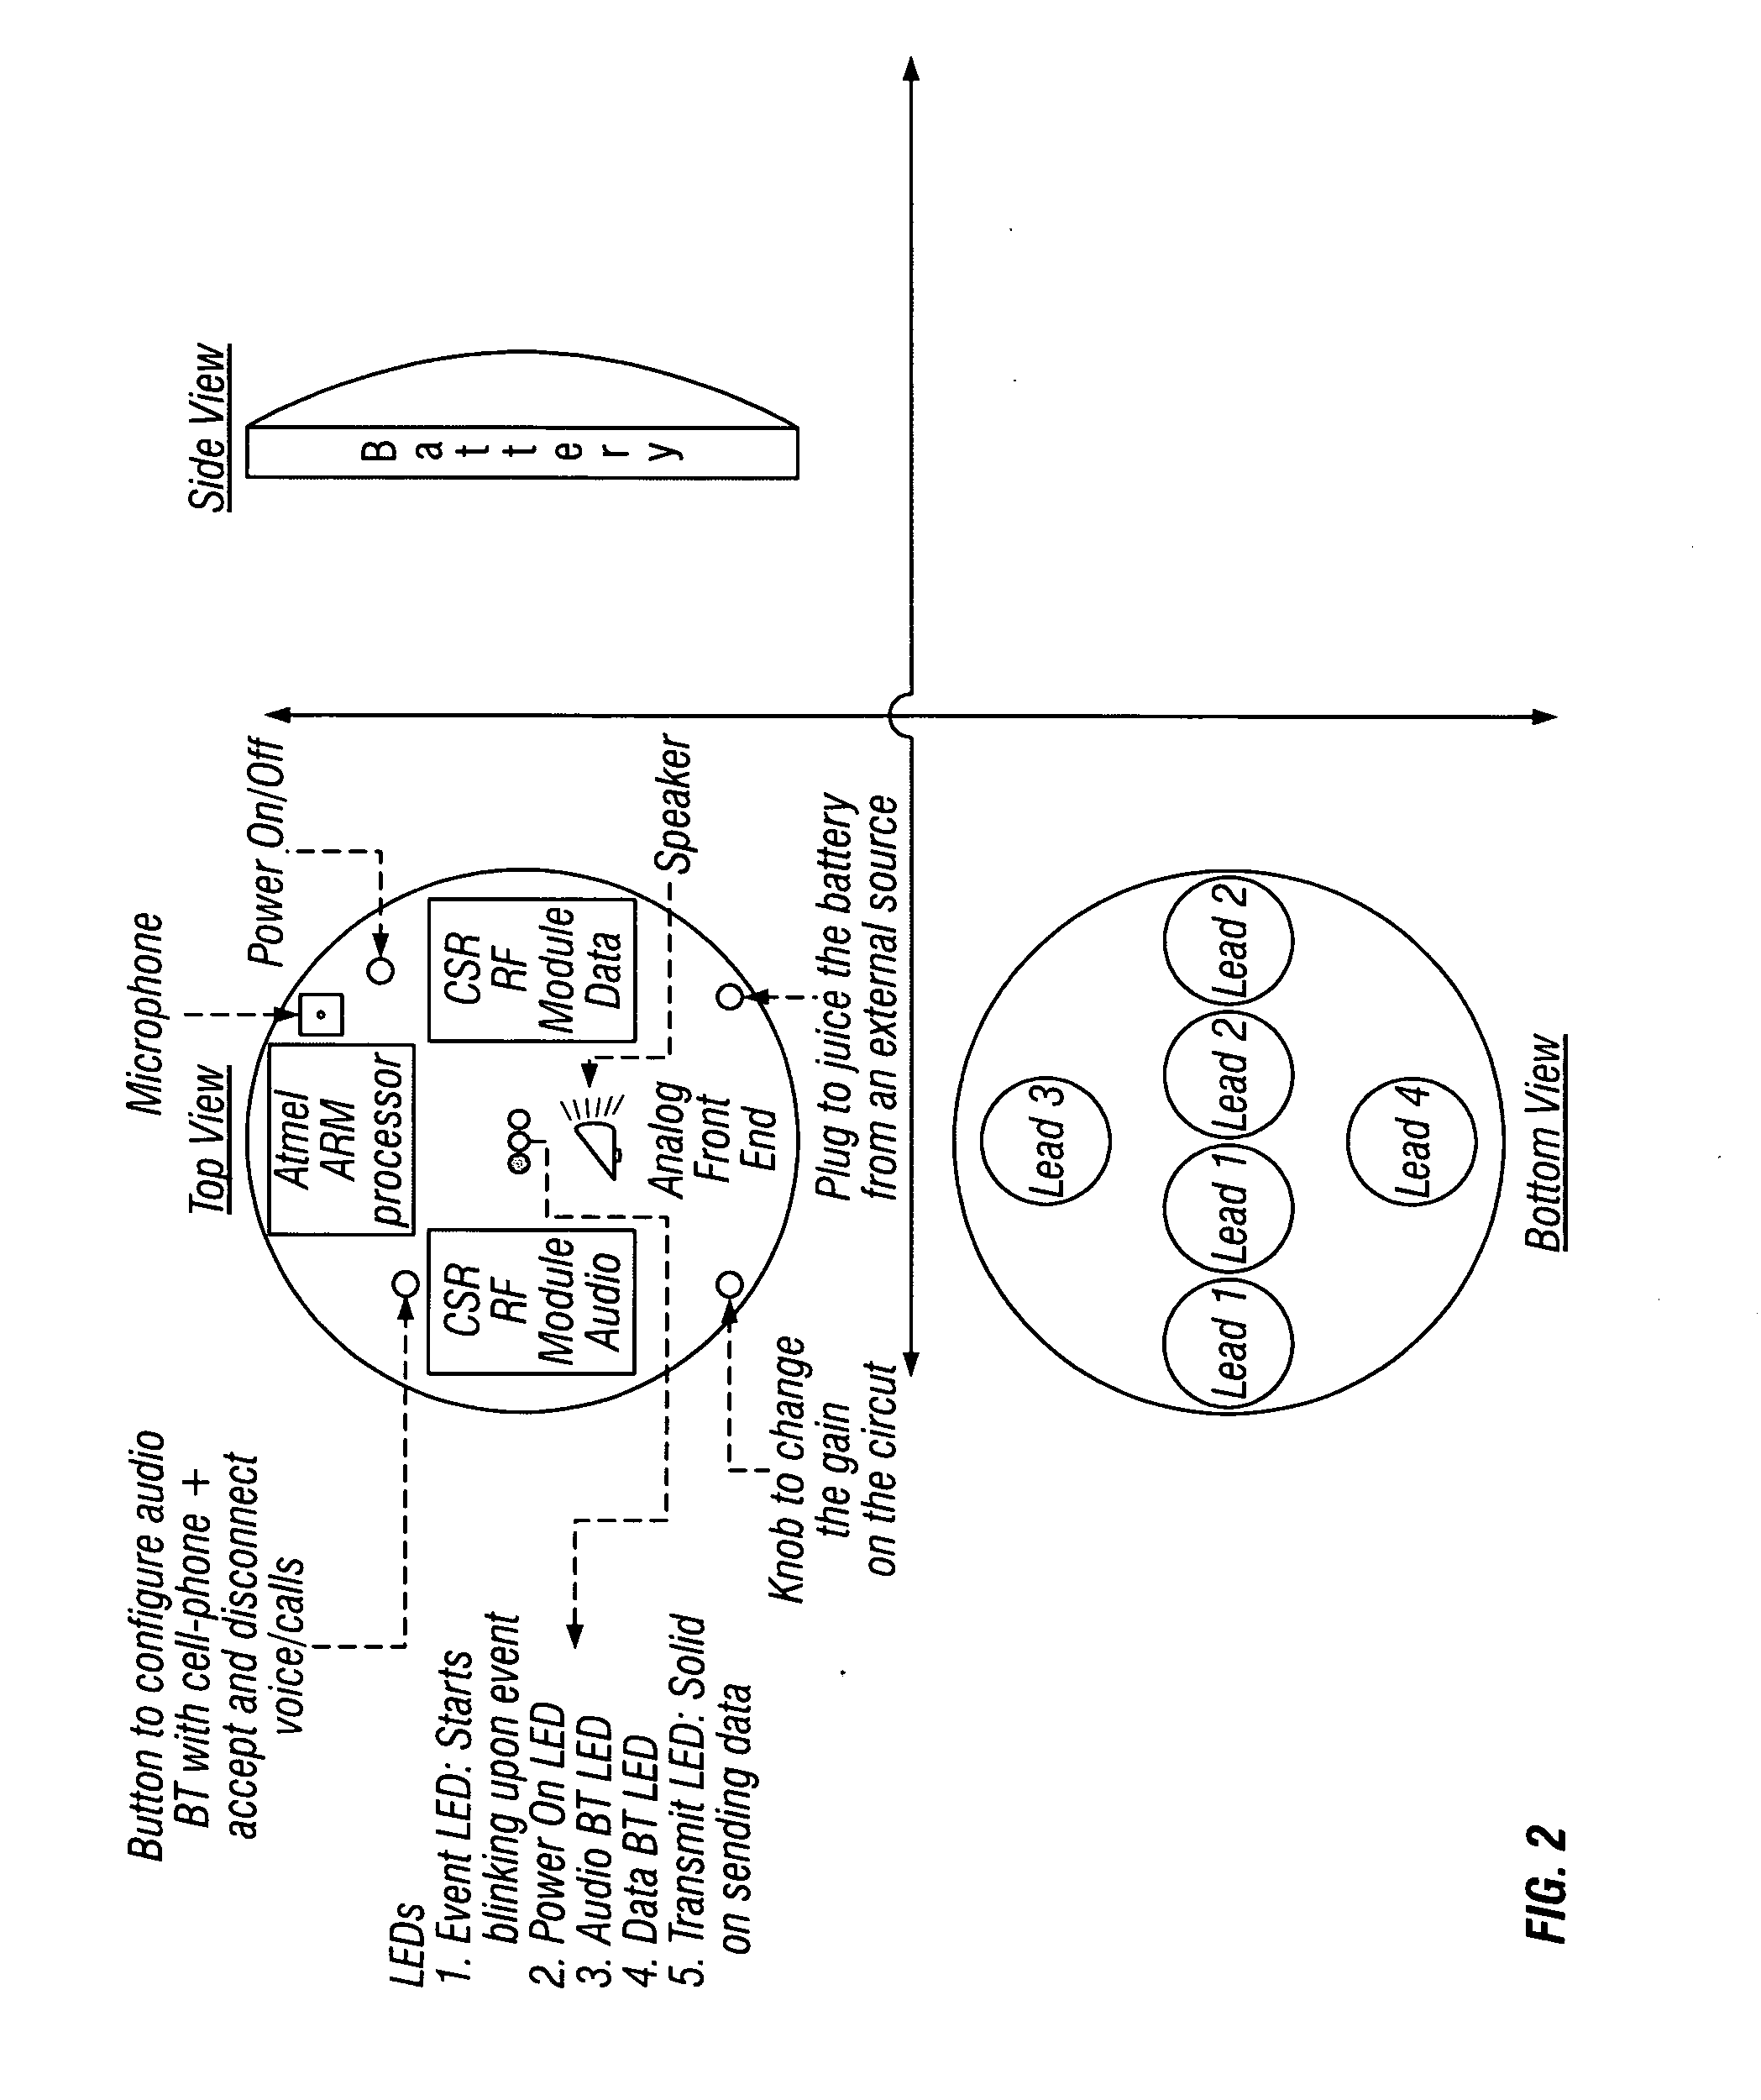 Heart monitor electrode system